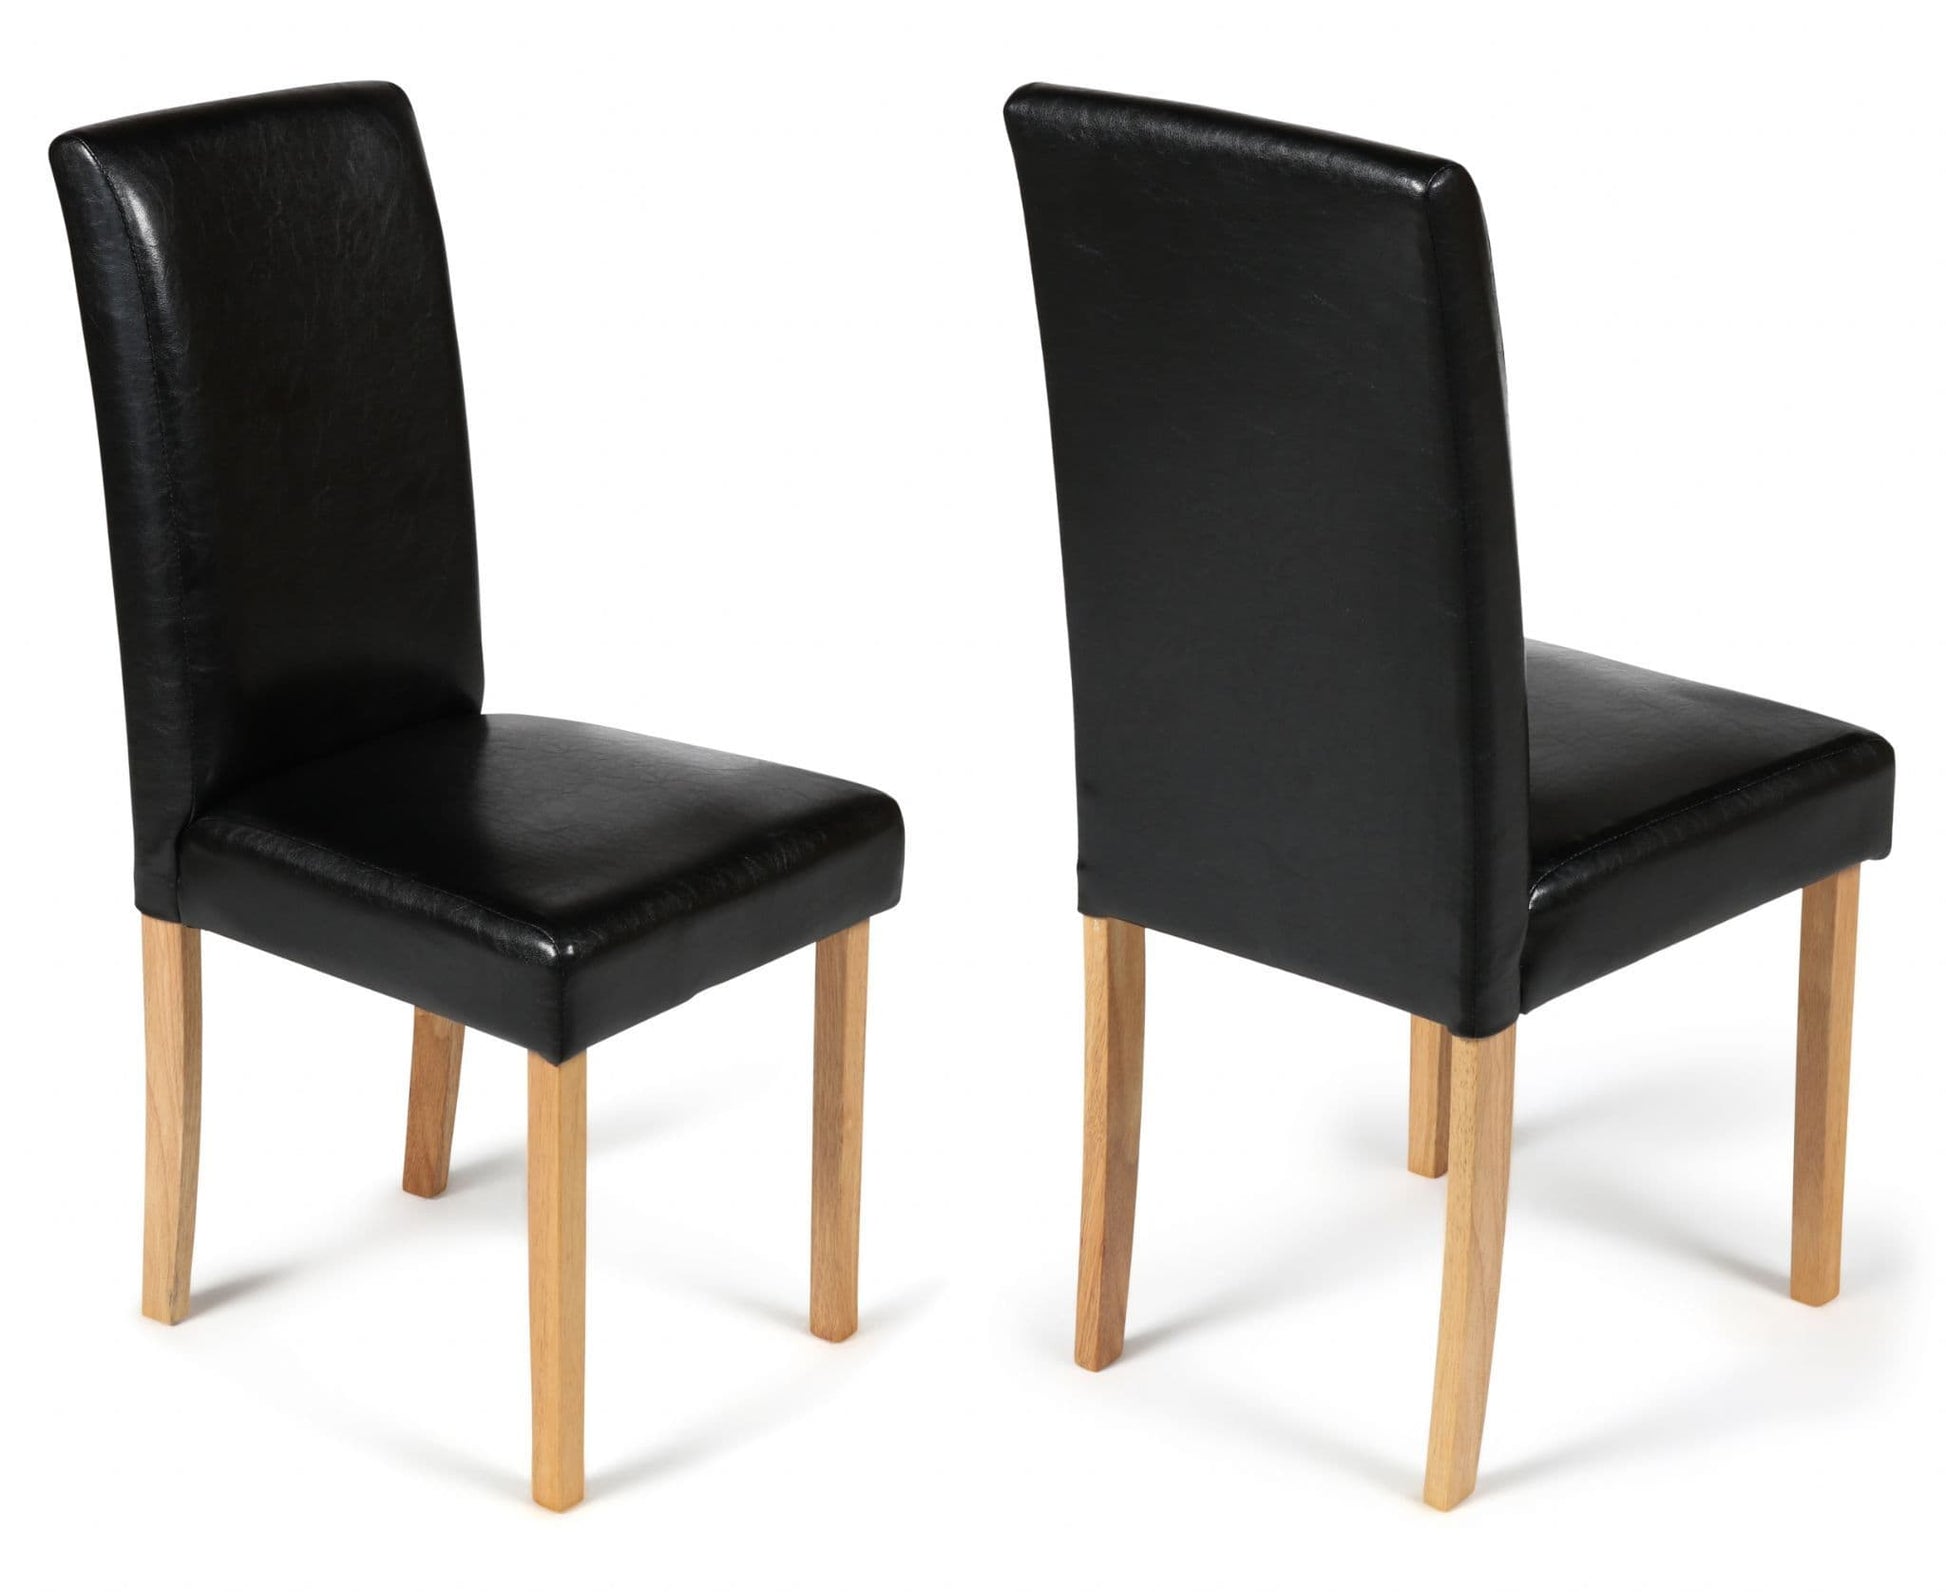 2 Black Torino Faux Leather Dining Chairs